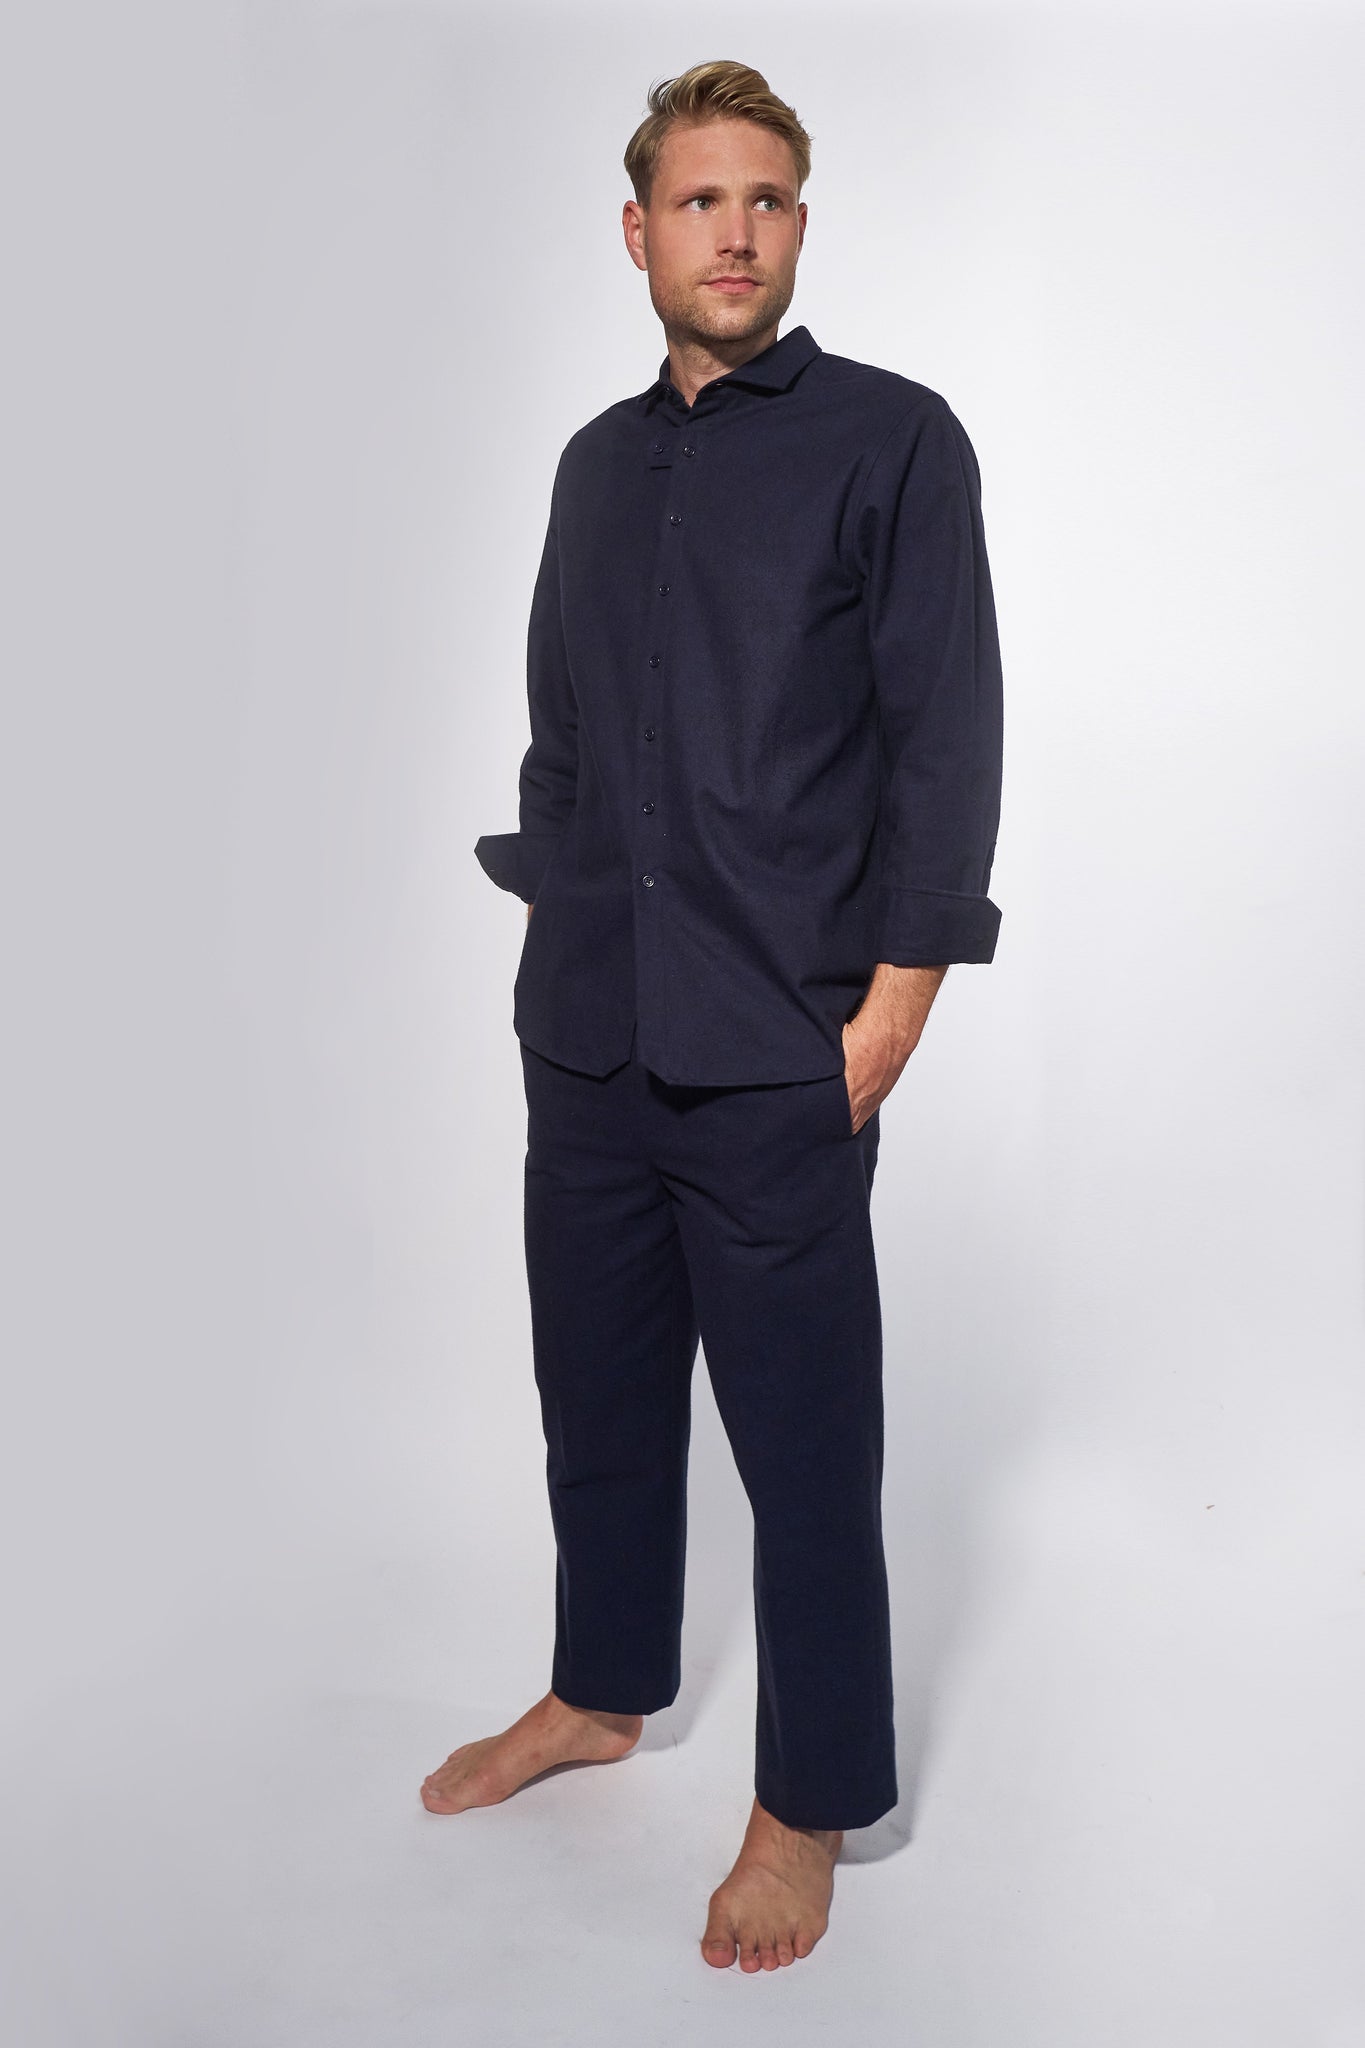 03/16 Mid-Waist Pants Navy male outfit - hello'ben store